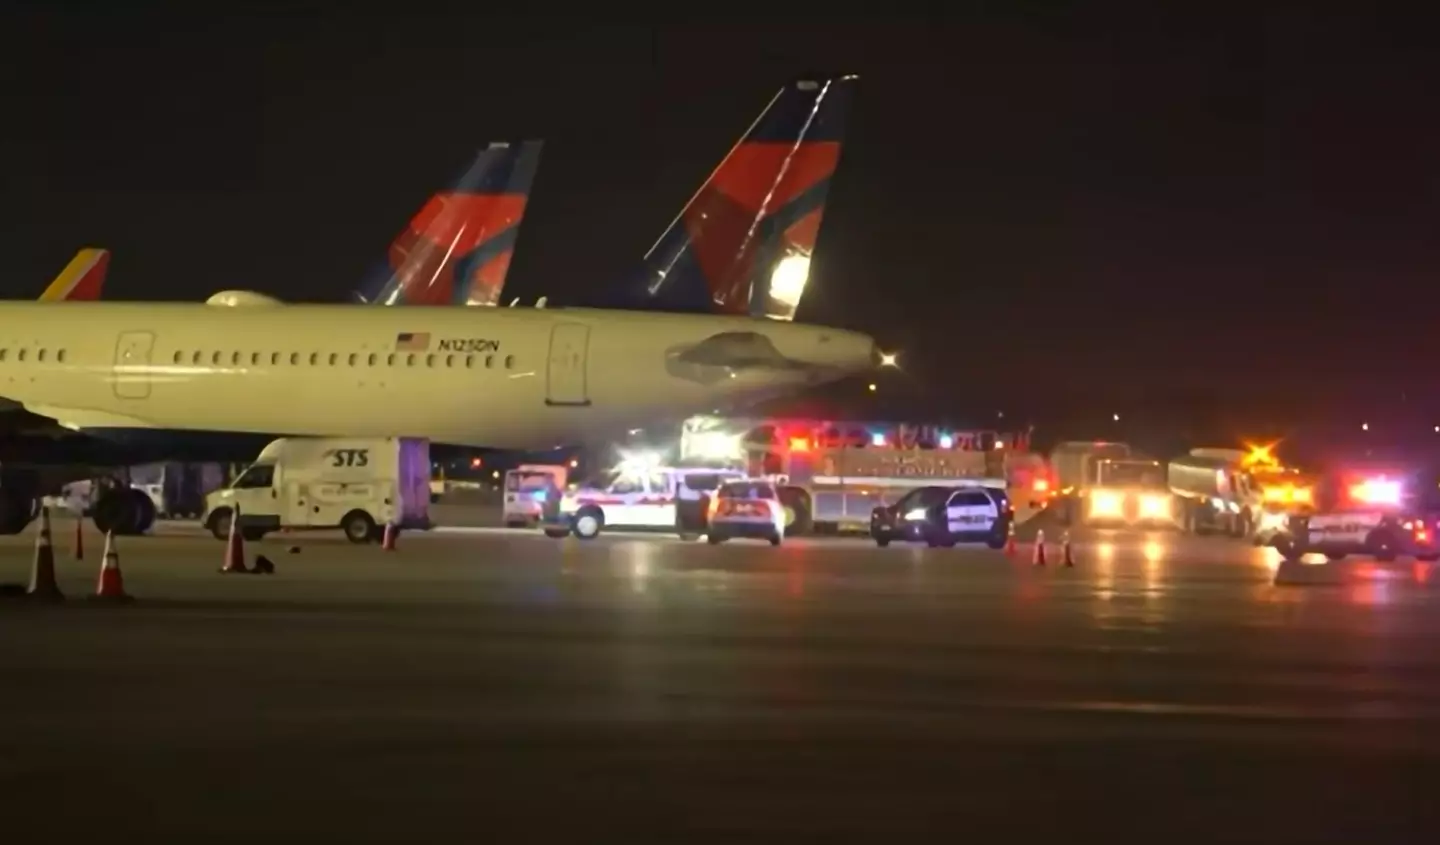 Emergency services were called to San Antonio International Airport on Friday night.